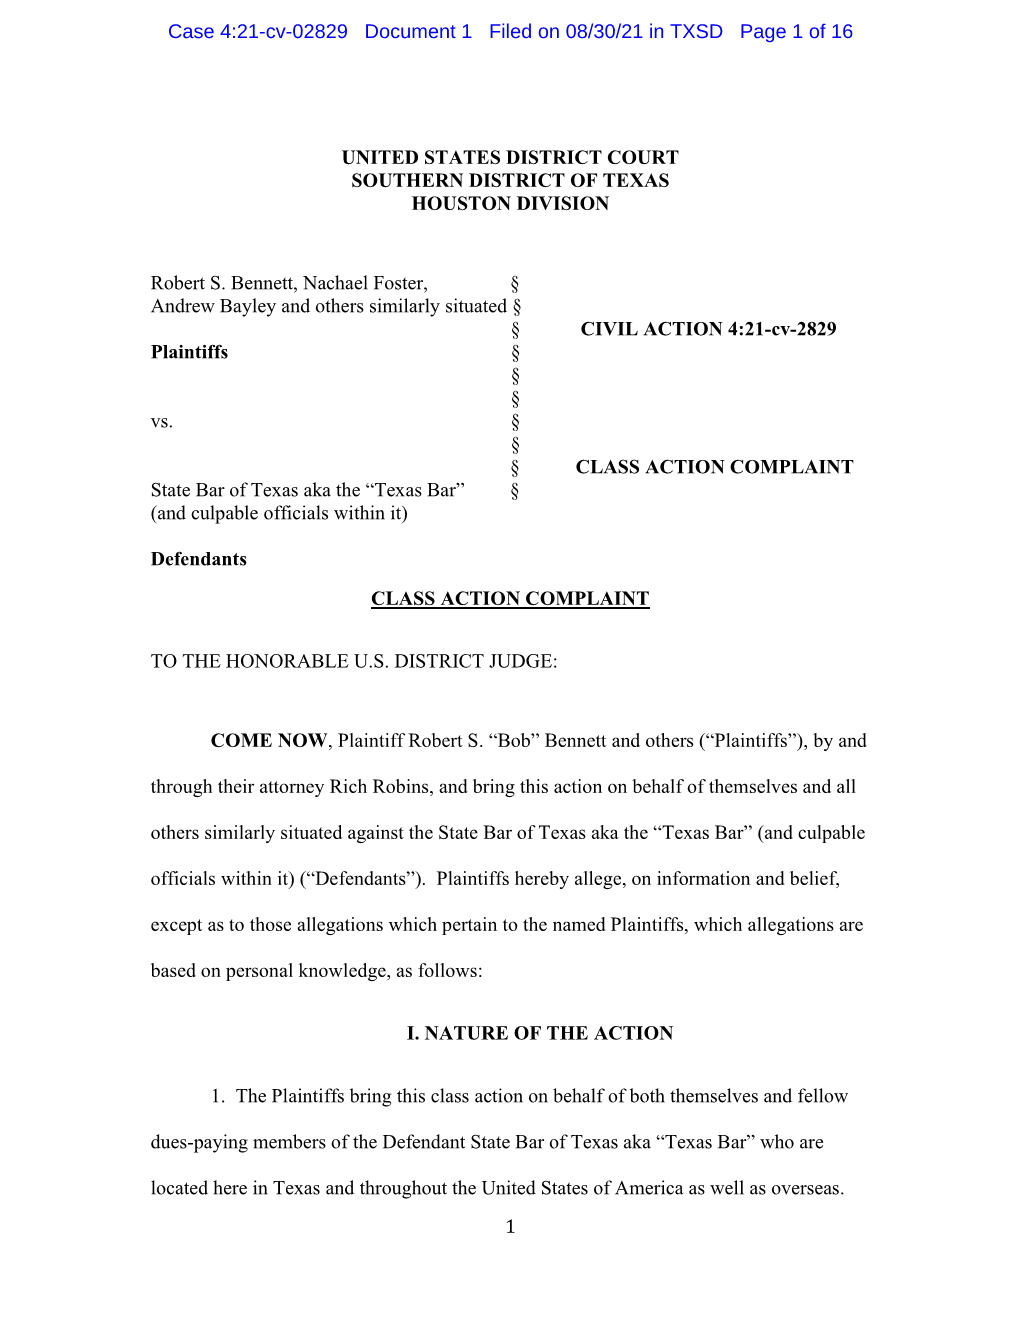 Case 4:21-Cv-02829 Document 1 Filed on 08/30/21 in TXSD Page 1 of 16